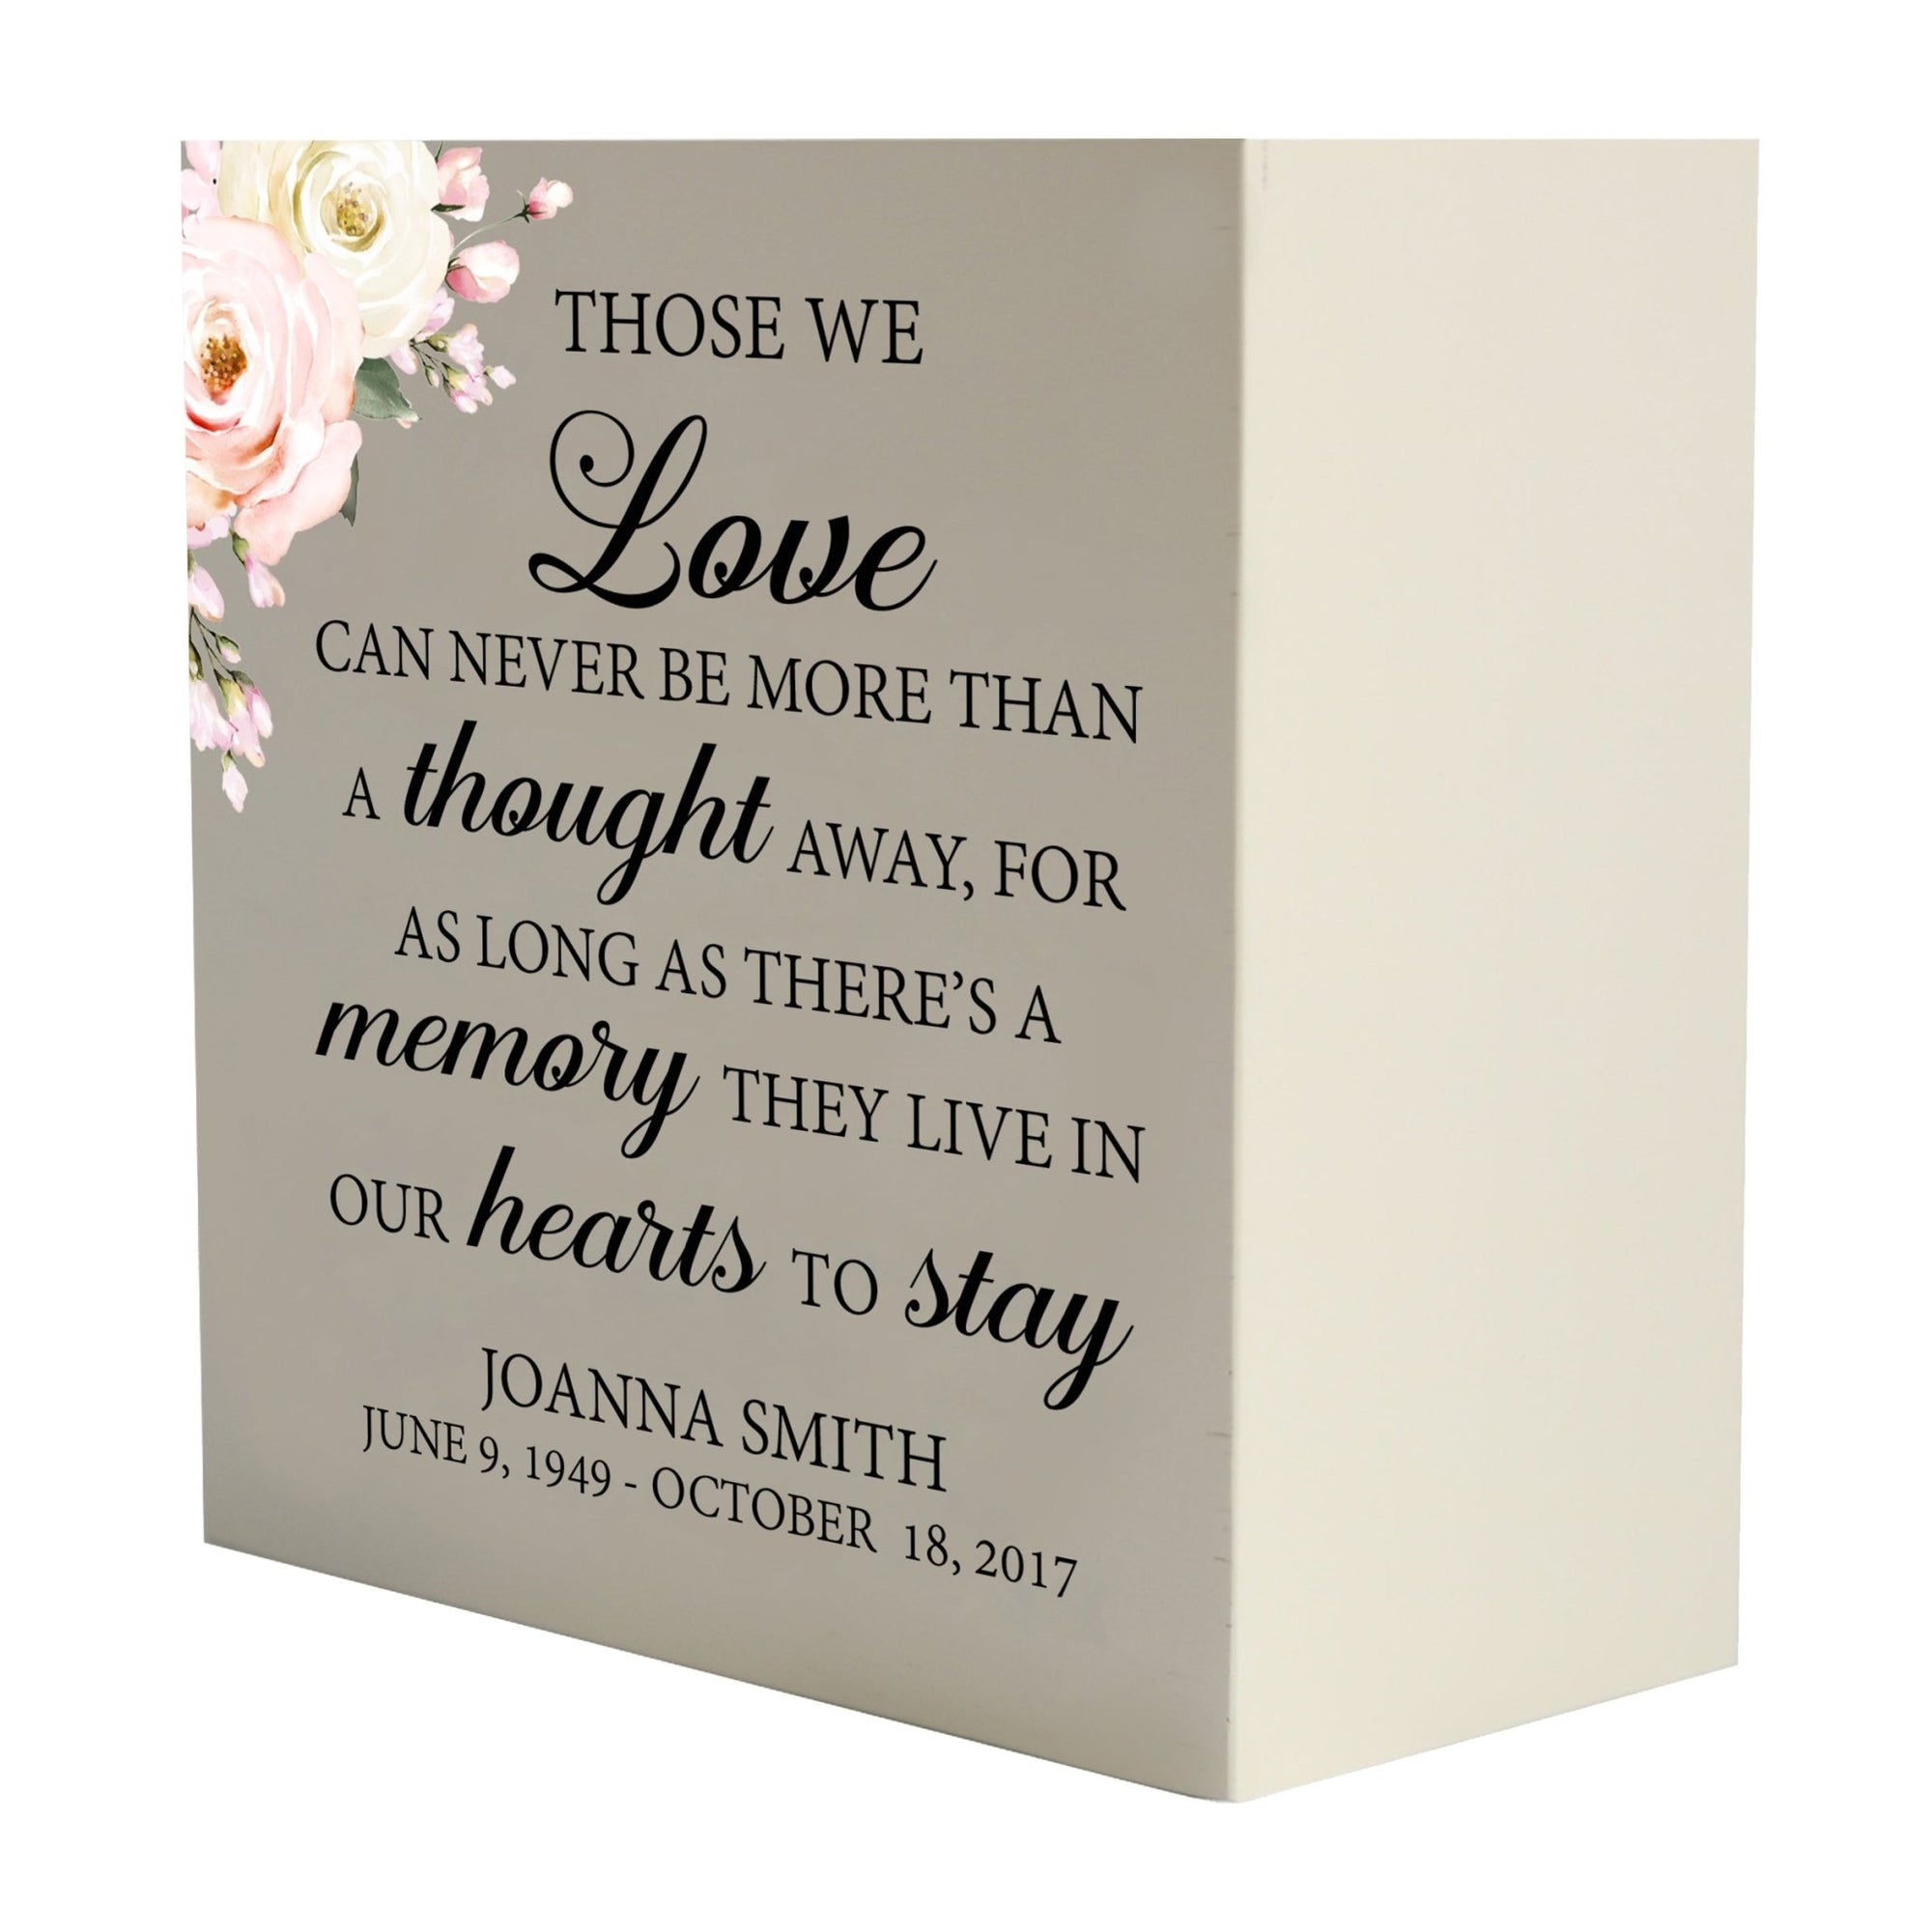 Personalized Modern Inspirational Memorial Wooden Shadow Box and Urn 6x6 holds 53 cu in of Human Ashes - Those We Love (Ivory) - LifeSong Milestones